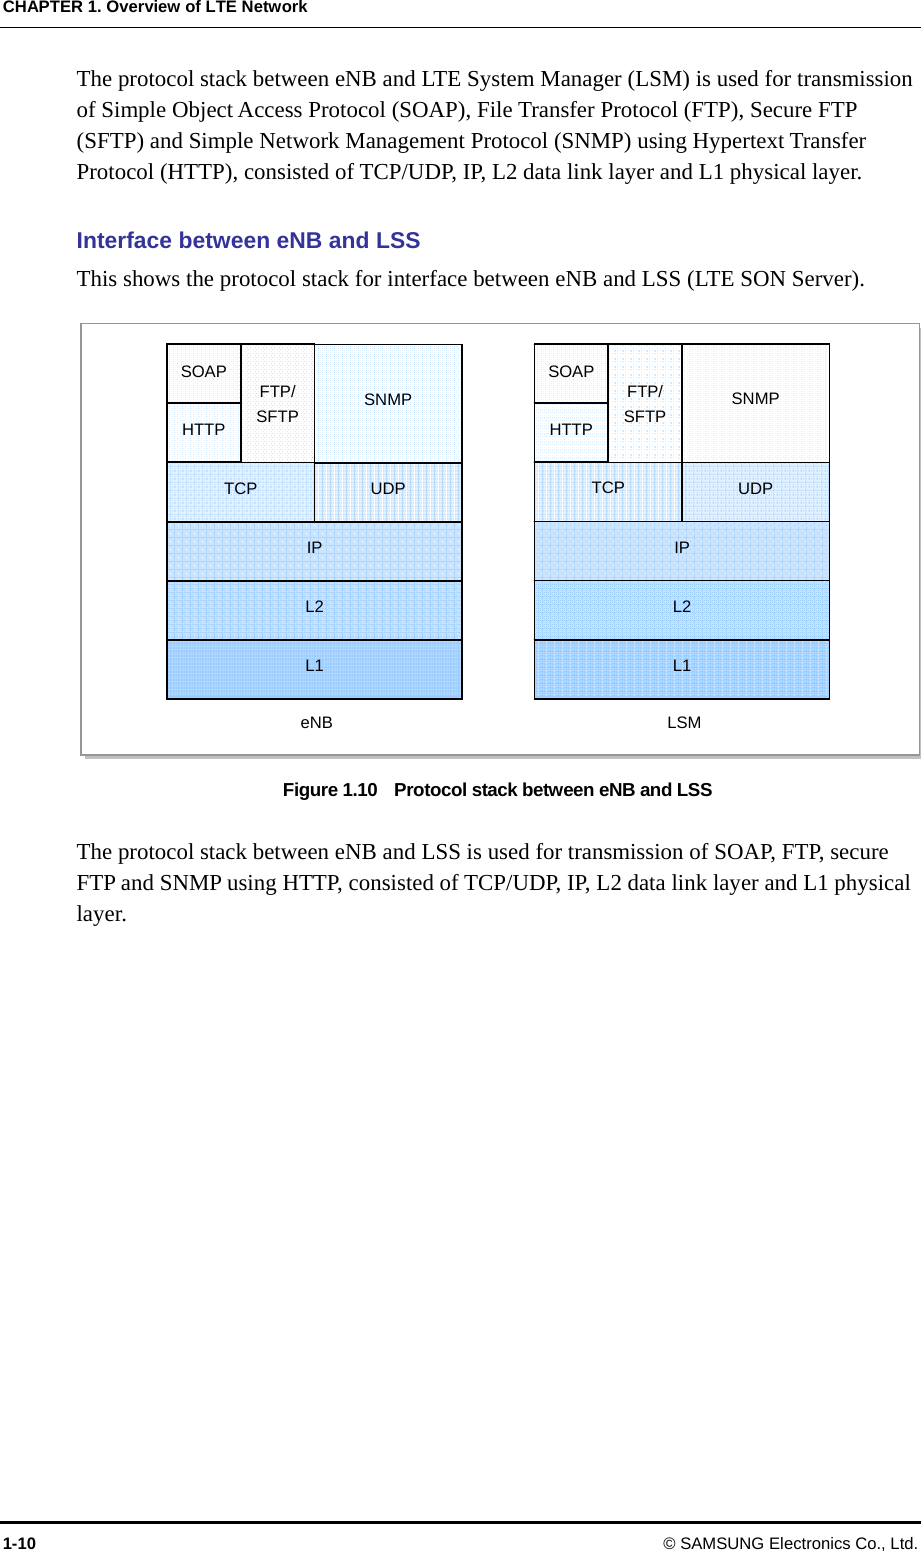 CHAPTER 1. Overview of LTE Network 1-10  © SAMSUNG Electronics Co., Ltd. The protocol stack between eNB and LTE System Manager (LSM) is used for transmission of Simple Object Access Protocol (SOAP), File Transfer Protocol (FTP), Secure FTP (SFTP) and Simple Network Management Protocol (SNMP) using Hypertext Transfer Protocol (HTTP), consisted of TCP/UDP, IP, L2 data link layer and L1 physical layer.  Interface between eNB and LSS This shows the protocol stack for interface between eNB and LSS (LTE SON Server).  Figure 1.10    Protocol stack between eNB and LSS  The protocol stack between eNB and LSS is used for transmission of SOAP, FTP, secure FTP and SNMP using HTTP, consisted of TCP/UDP, IP, L2 data link layer and L1 physical layer.  L1 L2 IP TCP  UDP  SNMP HTTPSOAP  FTP/ SFTP eNB L1 L2 IP TCP  UDP  SNMP SOAP  FTP/SFTPLSM HTTP